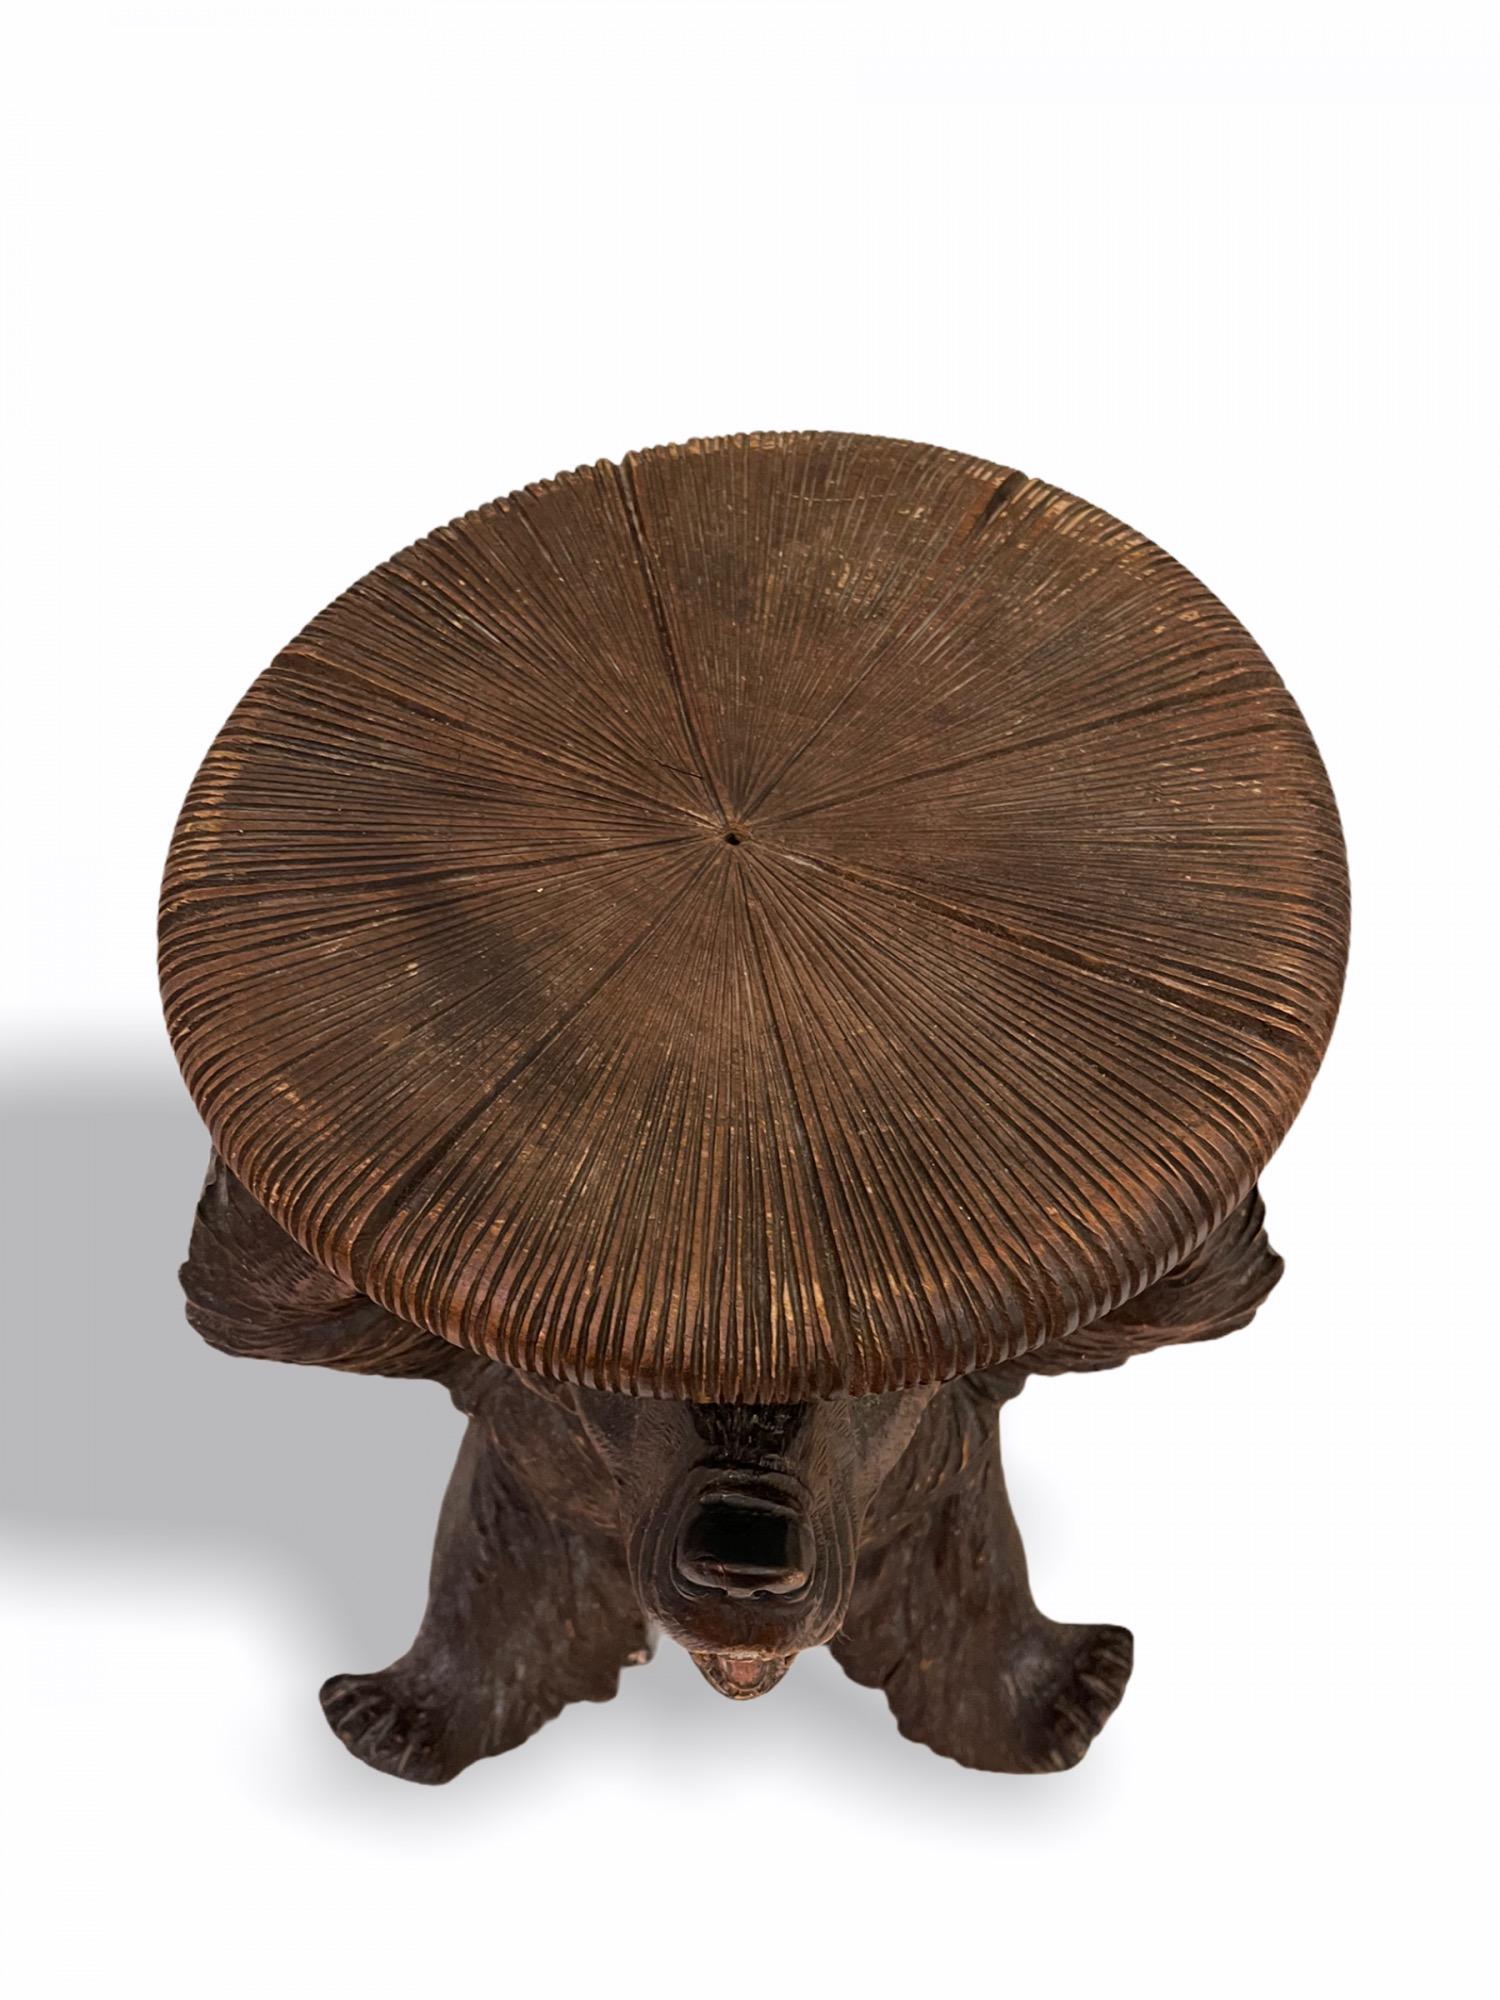 Swiss Black Forest Modeled Bear Piano Stool, Late 20th Century